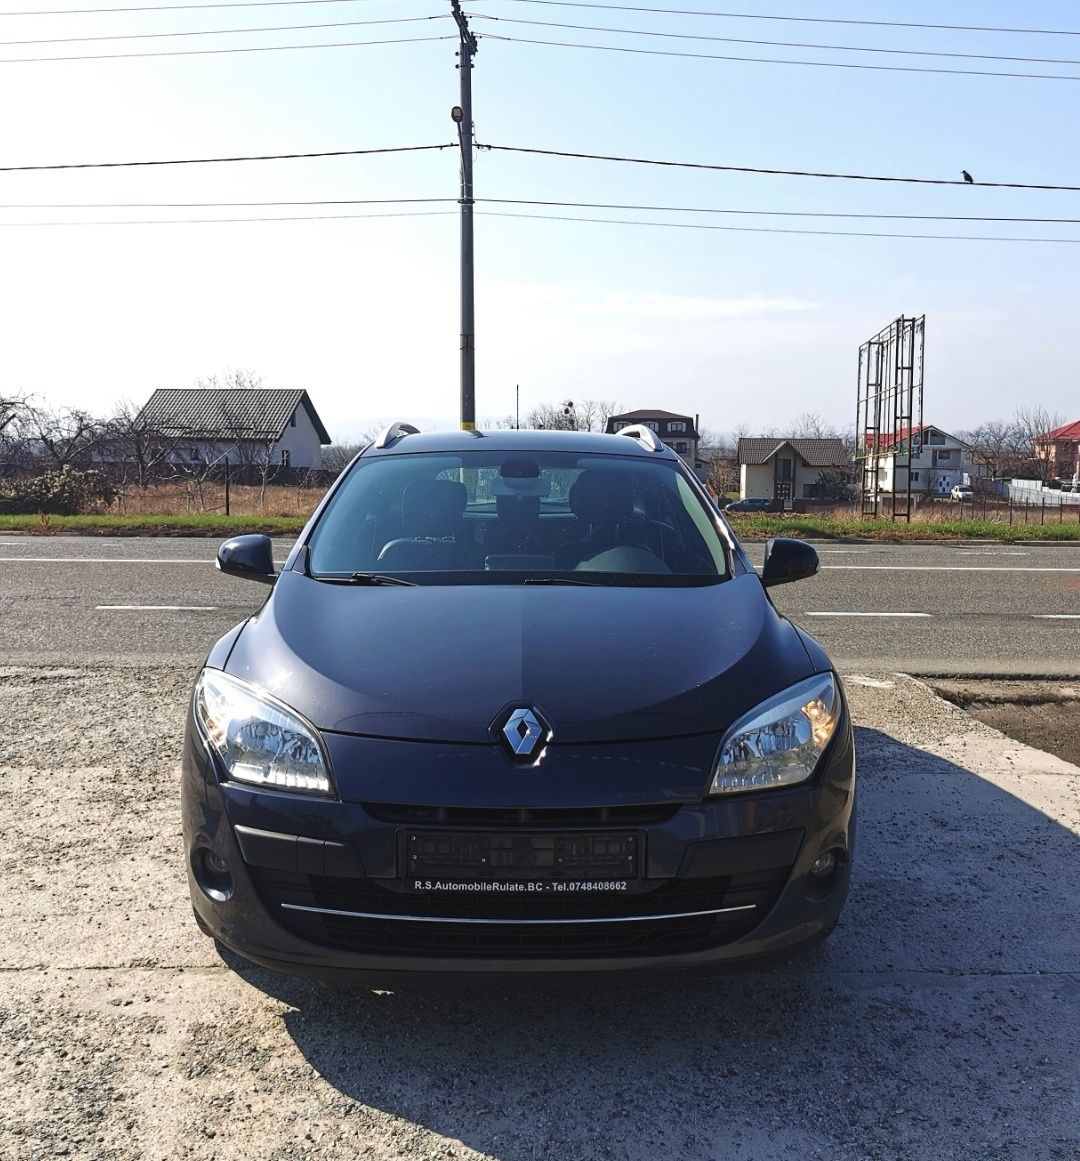 RENAULT MEGANE III 1.5 dCi / 110 Cp / Keyless Go/Entry / Clima / Pilot